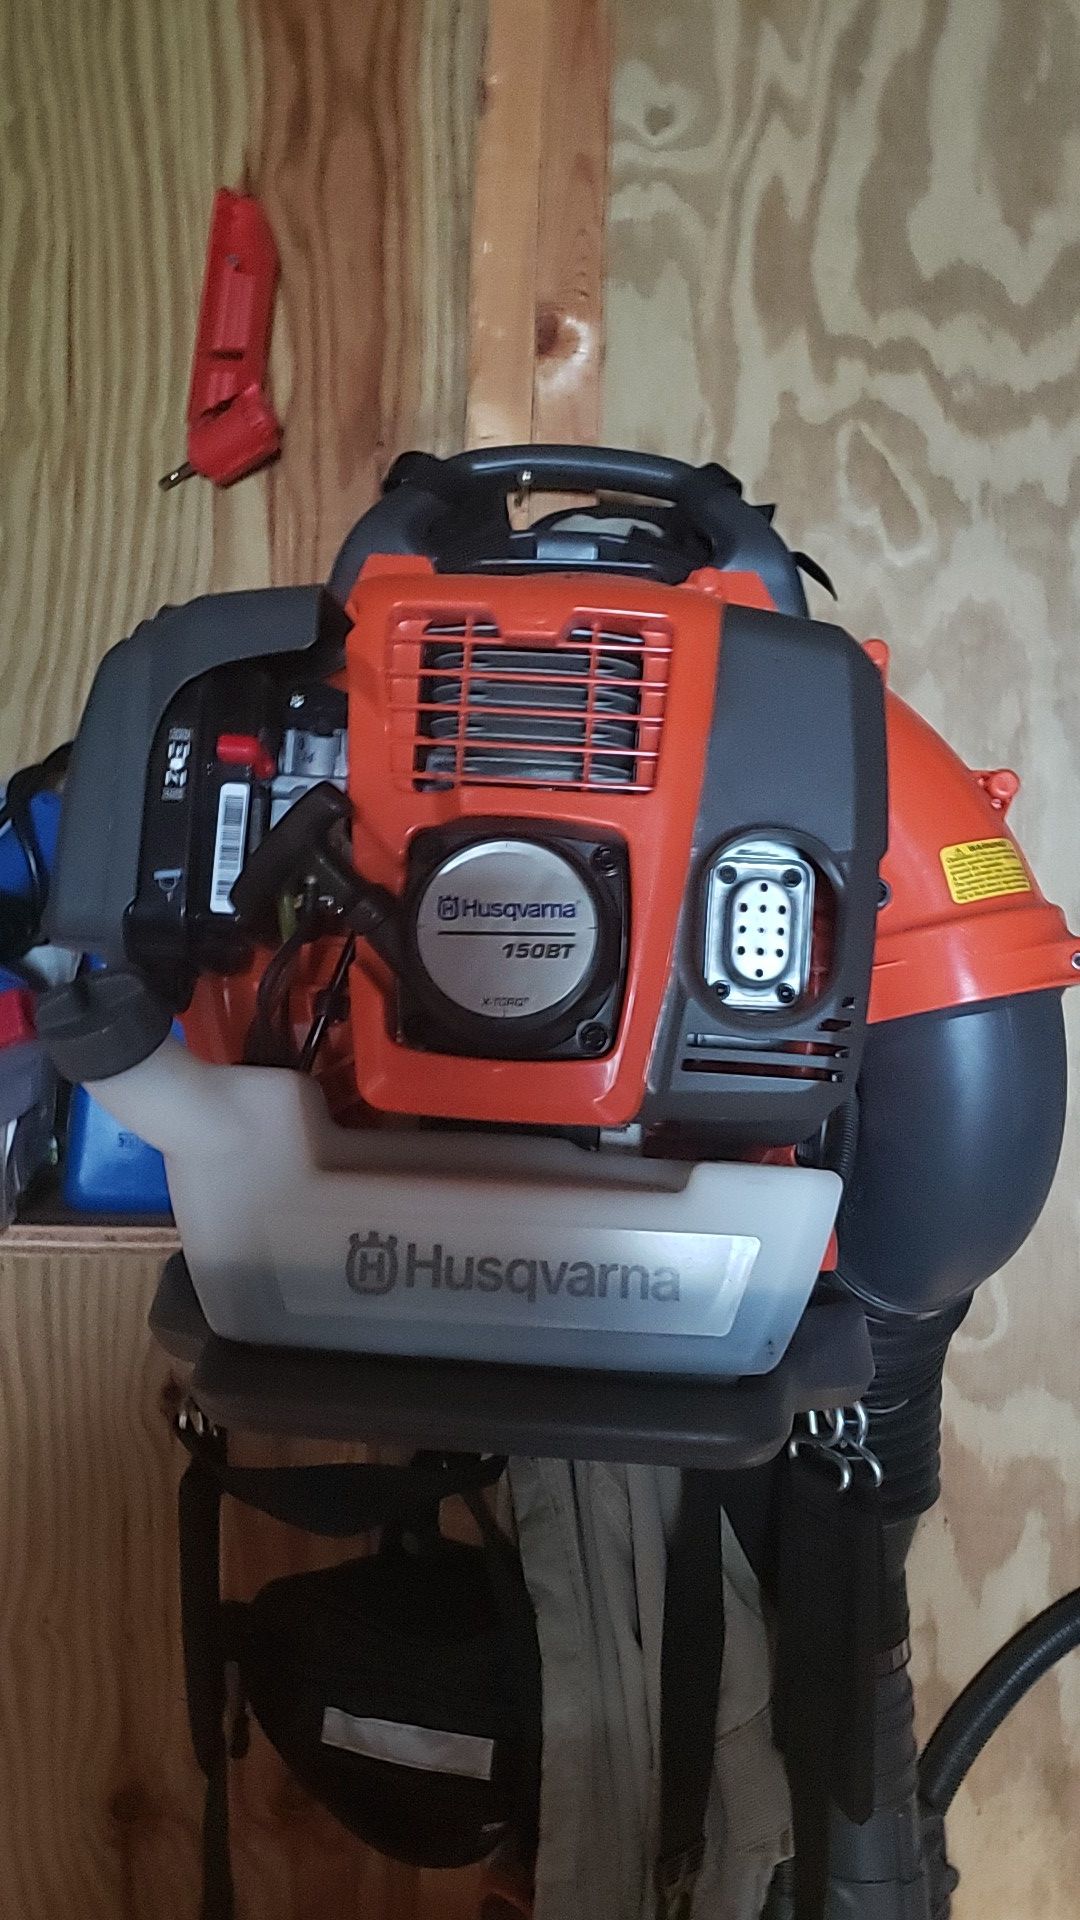 Husqvarna back pack blower. Excellent condition. Just used couple times at home. 150 bt